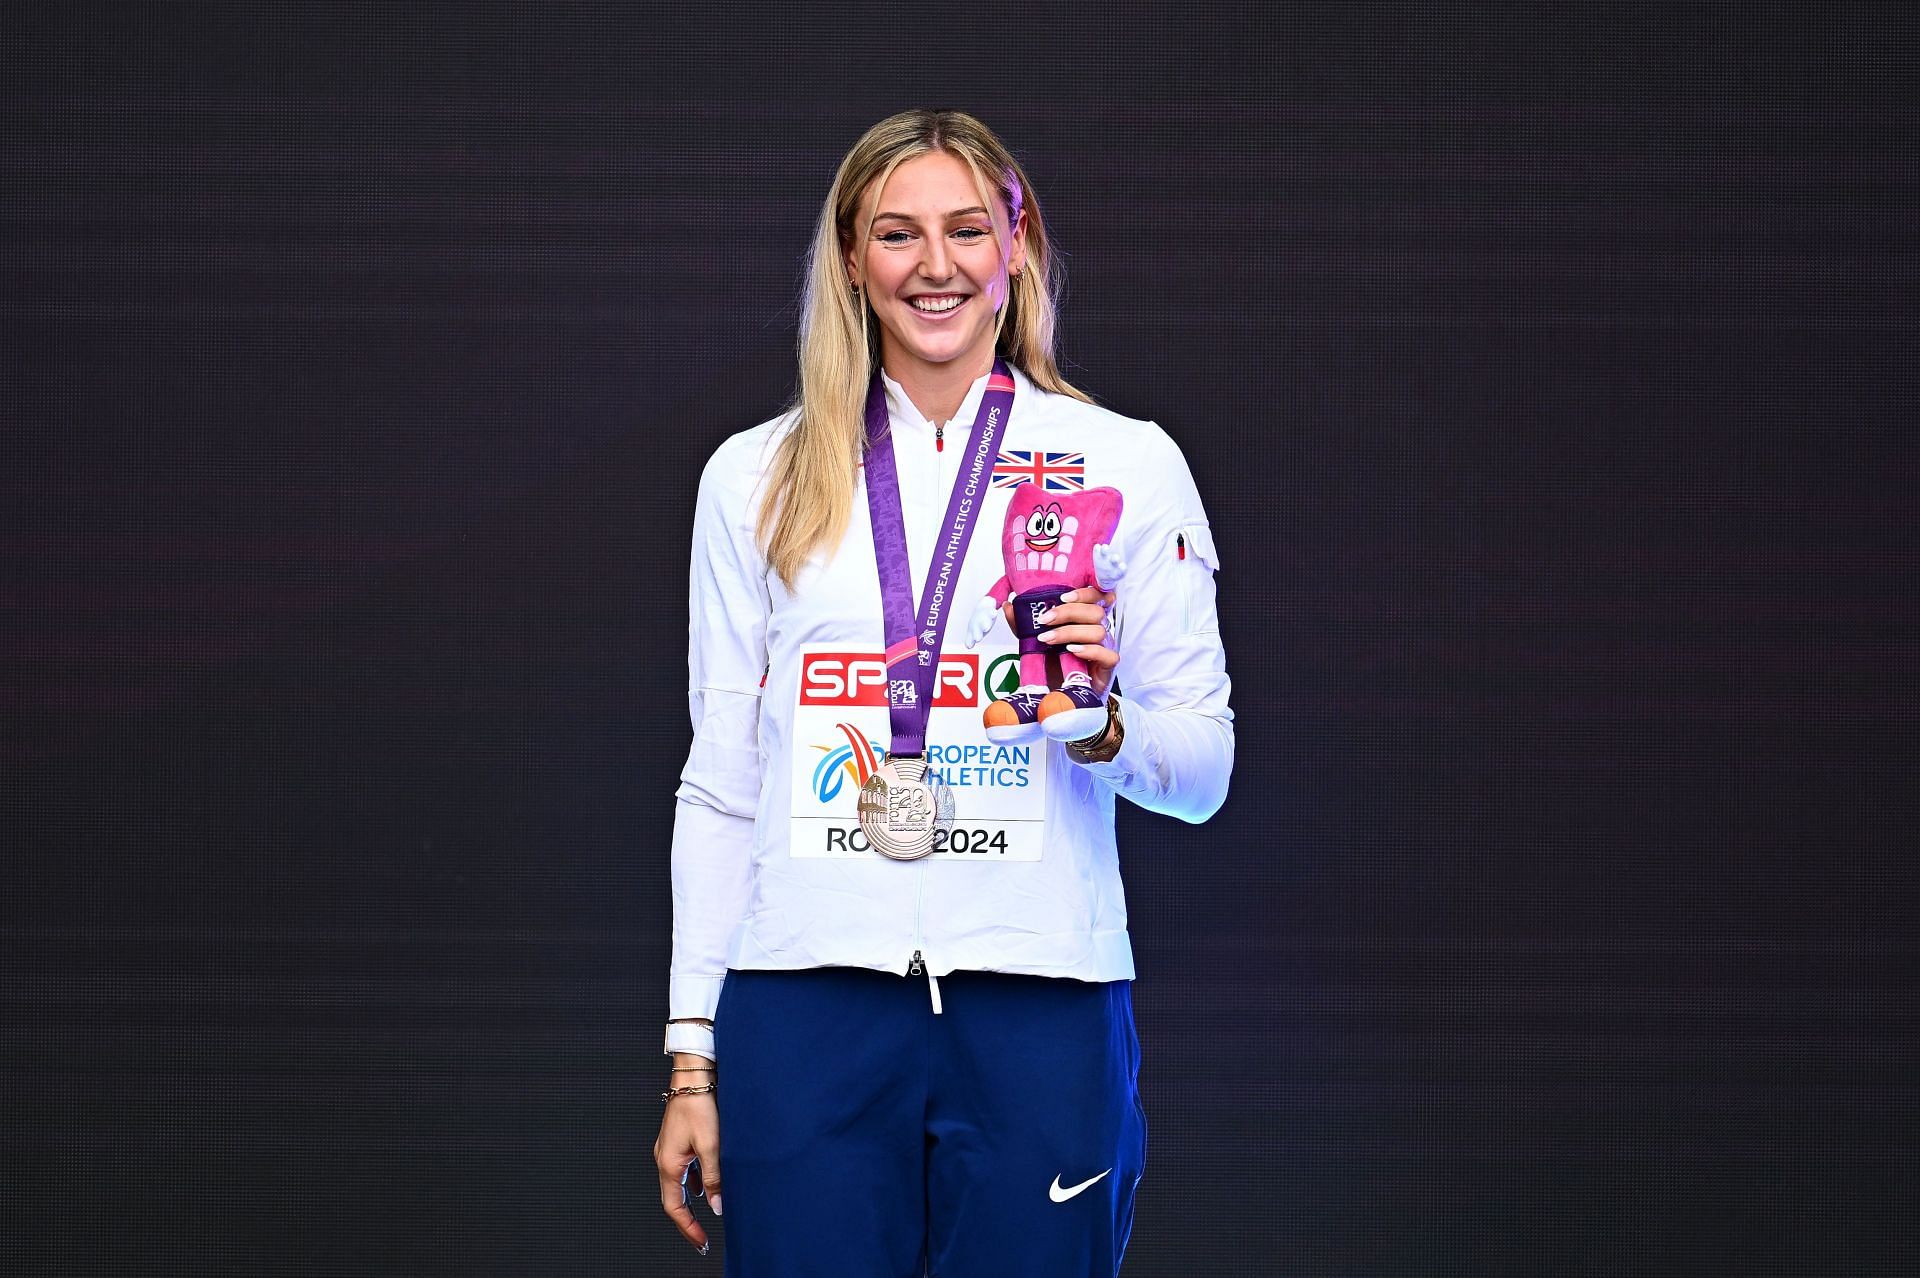 Molly Caudery during the medal ceremony for the Women&#039;s Pole Vault Final at the 26th European Athletics Championships - Rome 2024. (Photo by Mattia Ozbot/Getty Images for European Athletics)